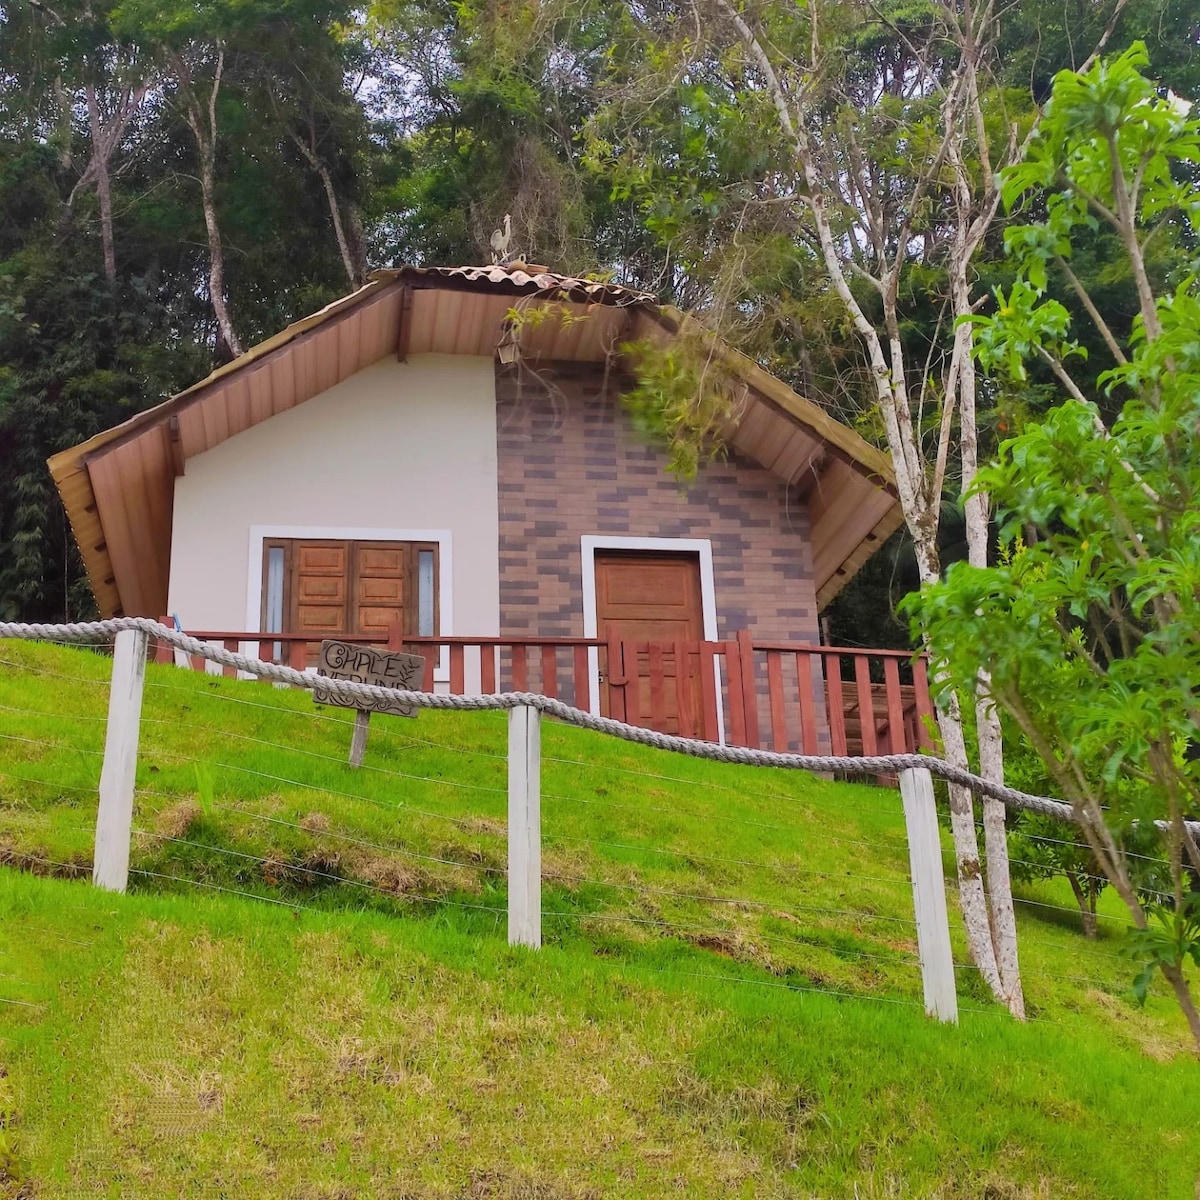 Chalet Neblina - Site in the Mountains